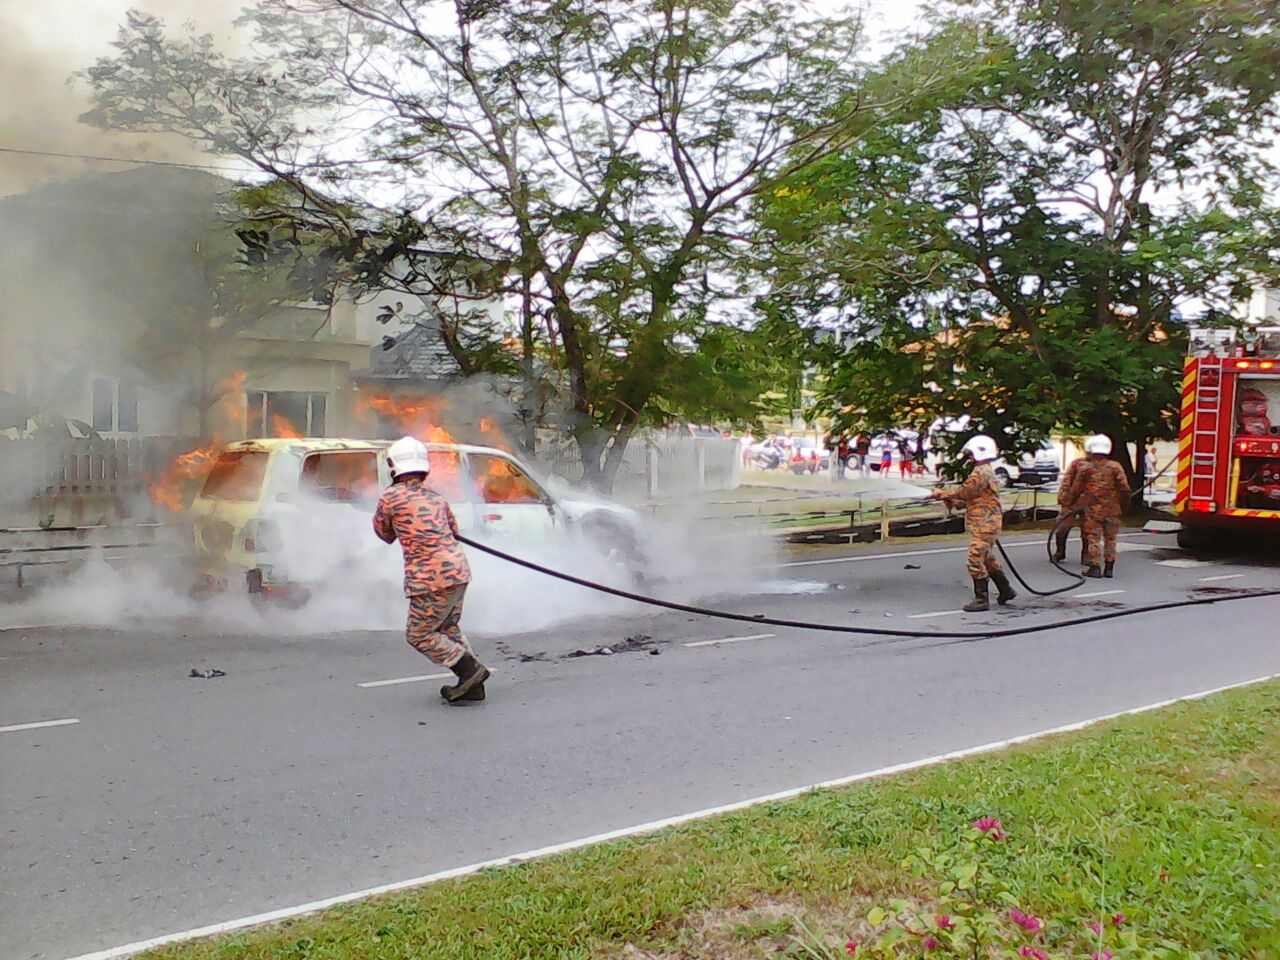 Firefighters work to put out the fire.